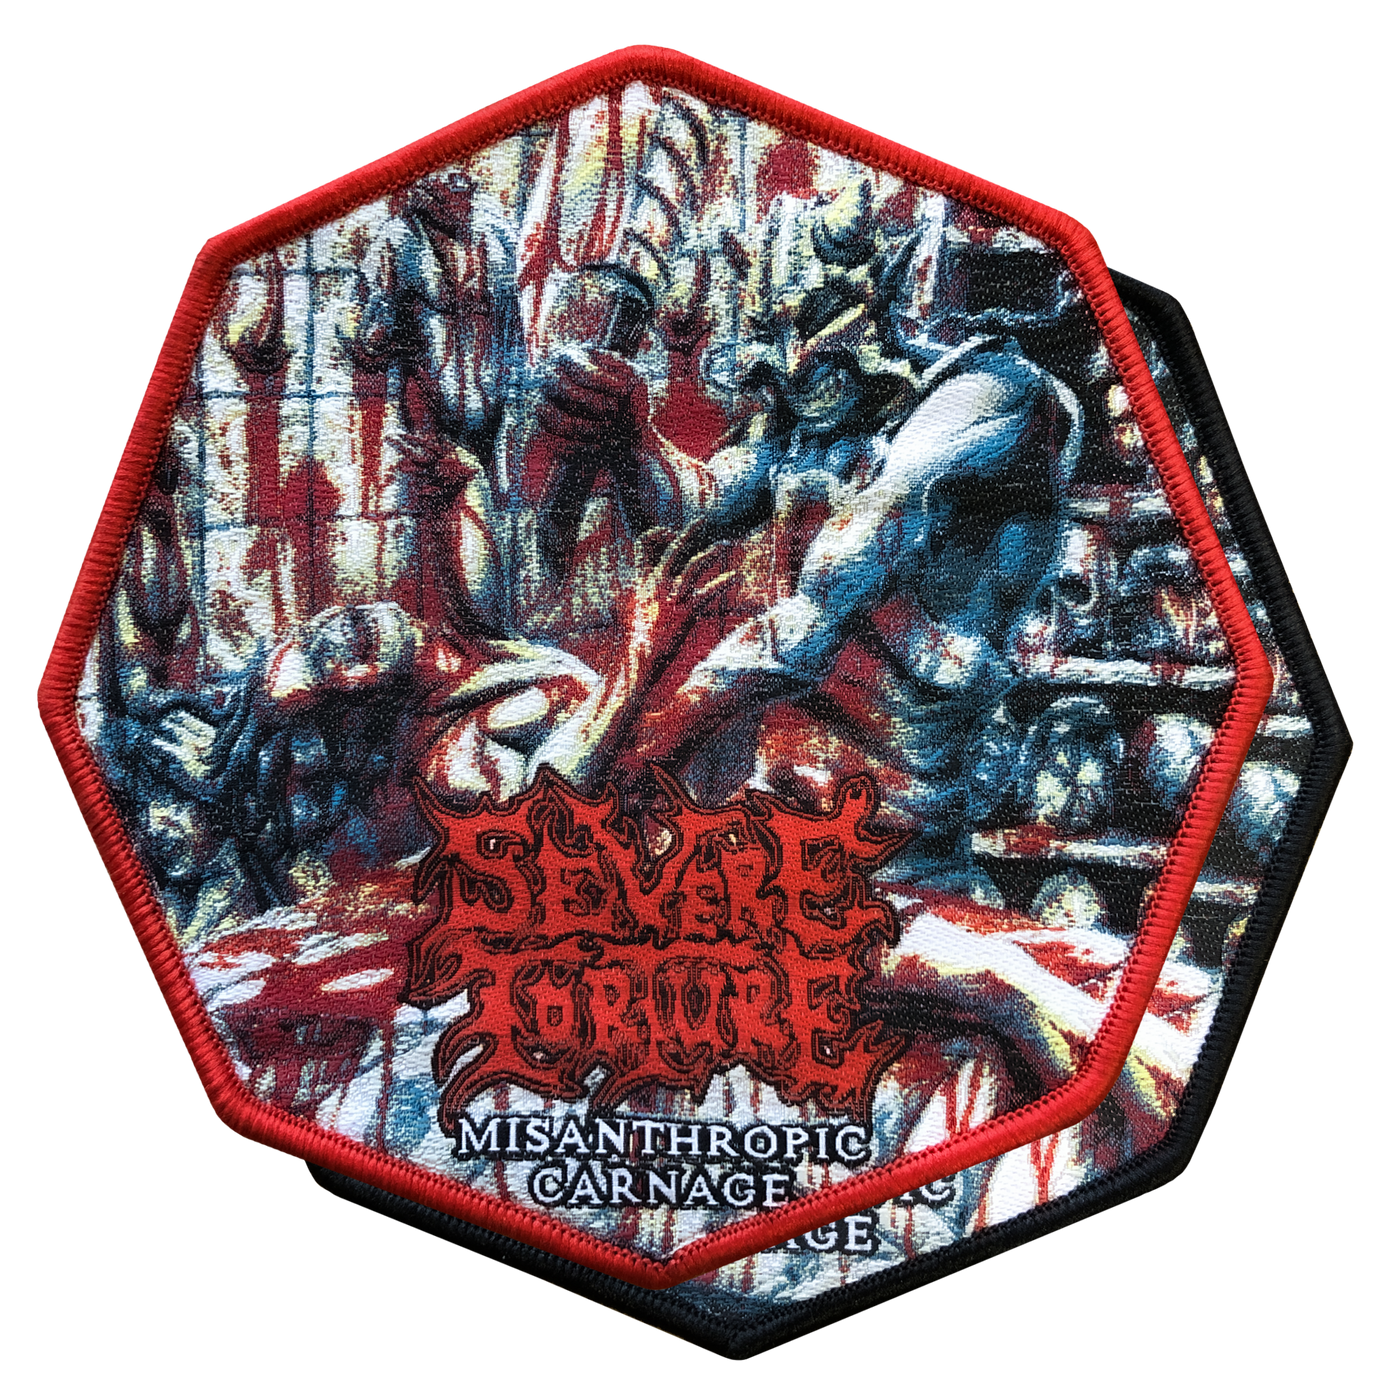 Severe Torture 'Misanthropic Carnage' Patch